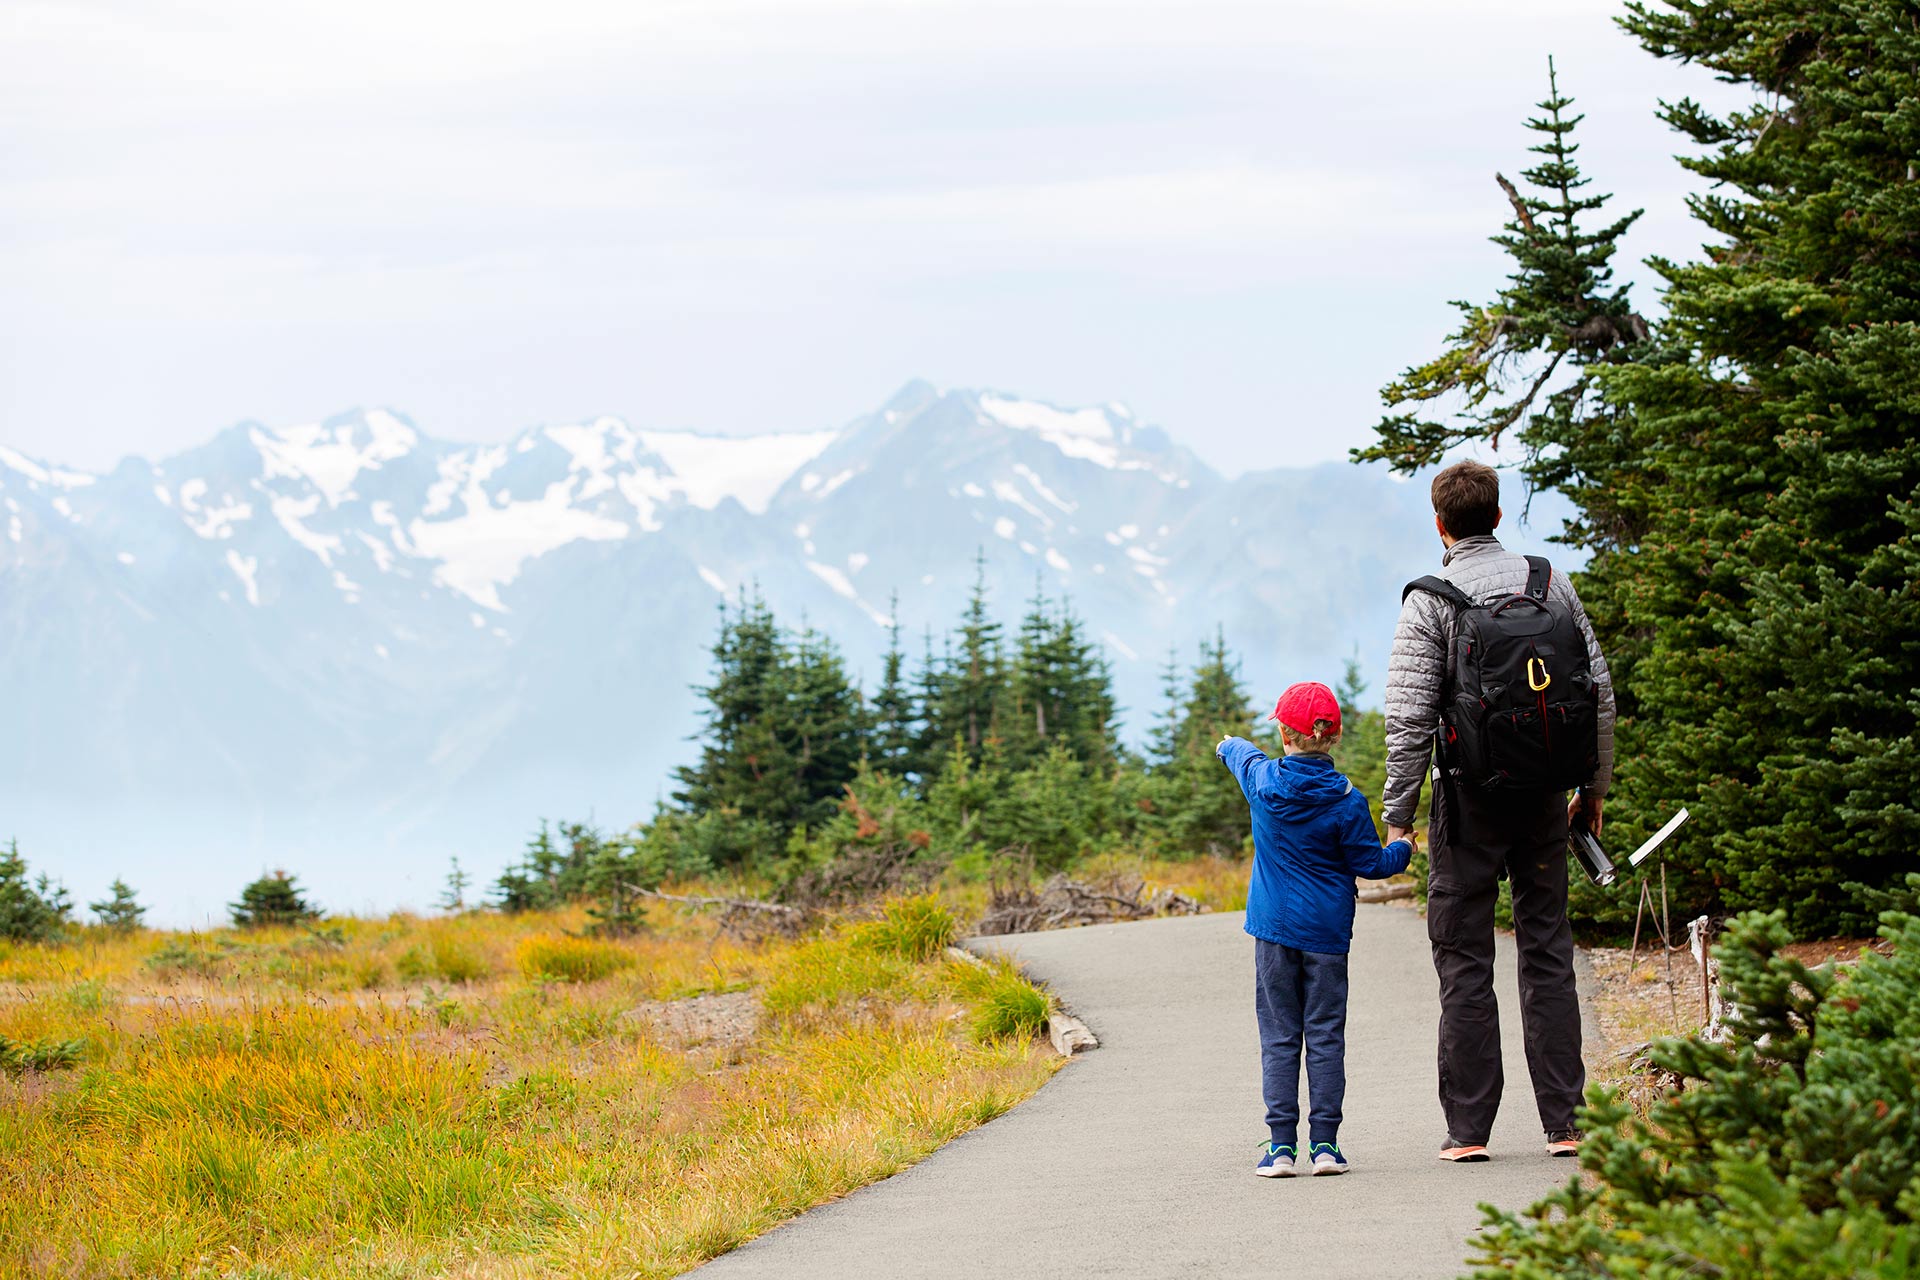 A father and son taking in the beautiful views at Olympic National Park in Washington.